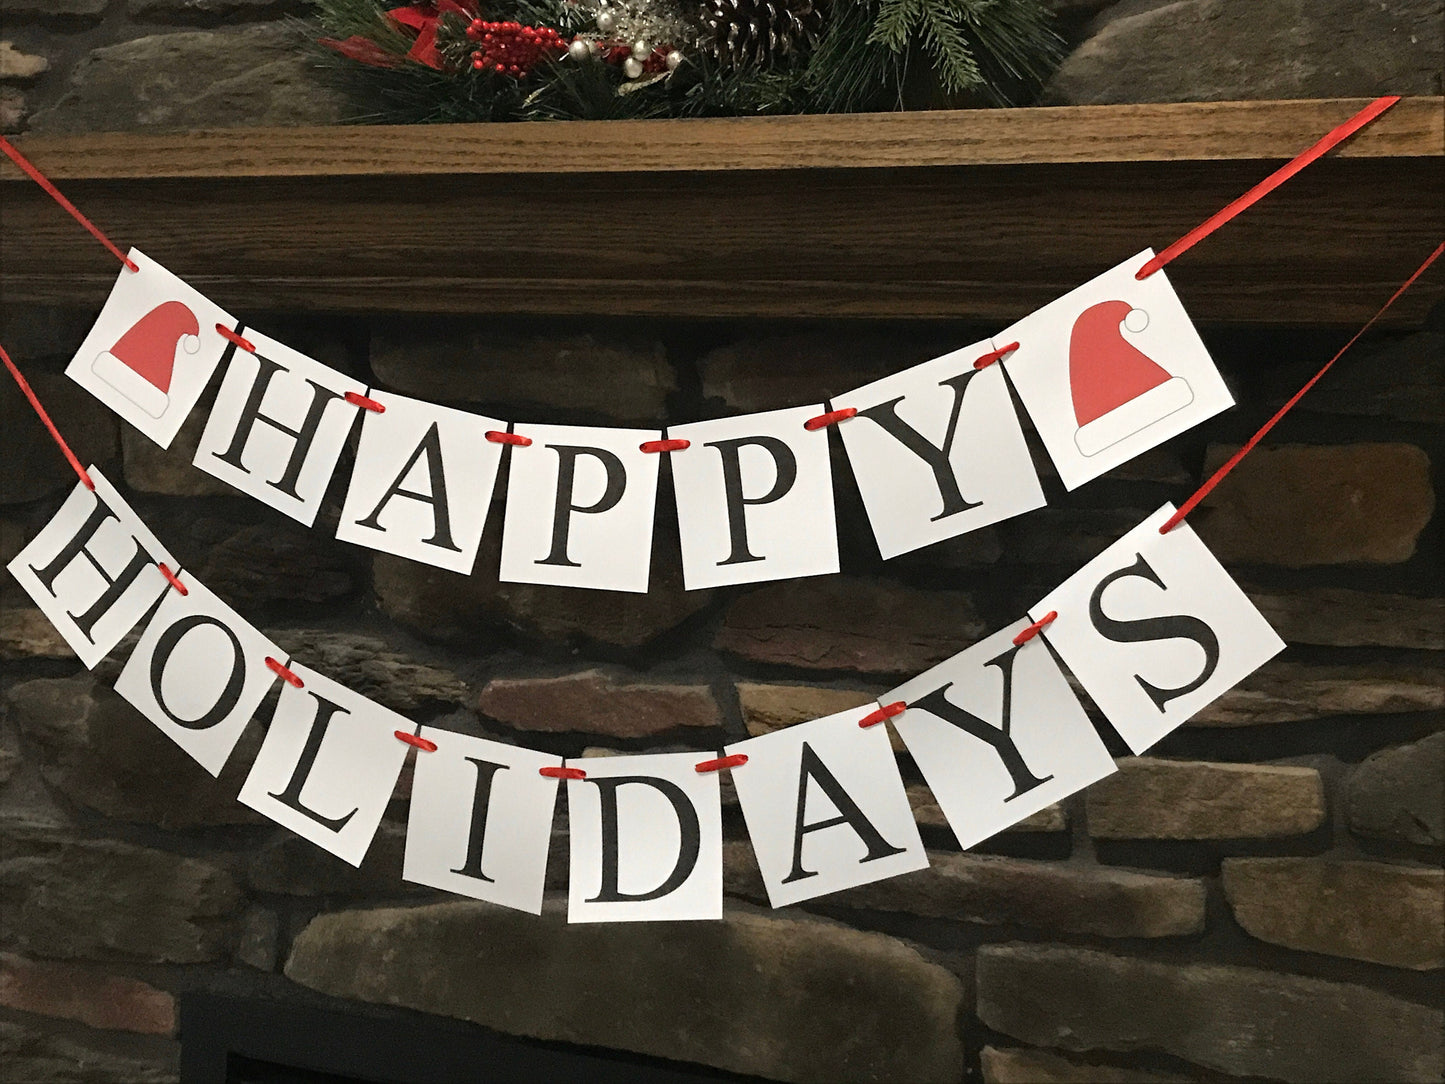 Happy Holidays Banner, Santa hat Christmas decorations, living room holiday decor, fireplace mantel bunting, red Merry Christmas garland